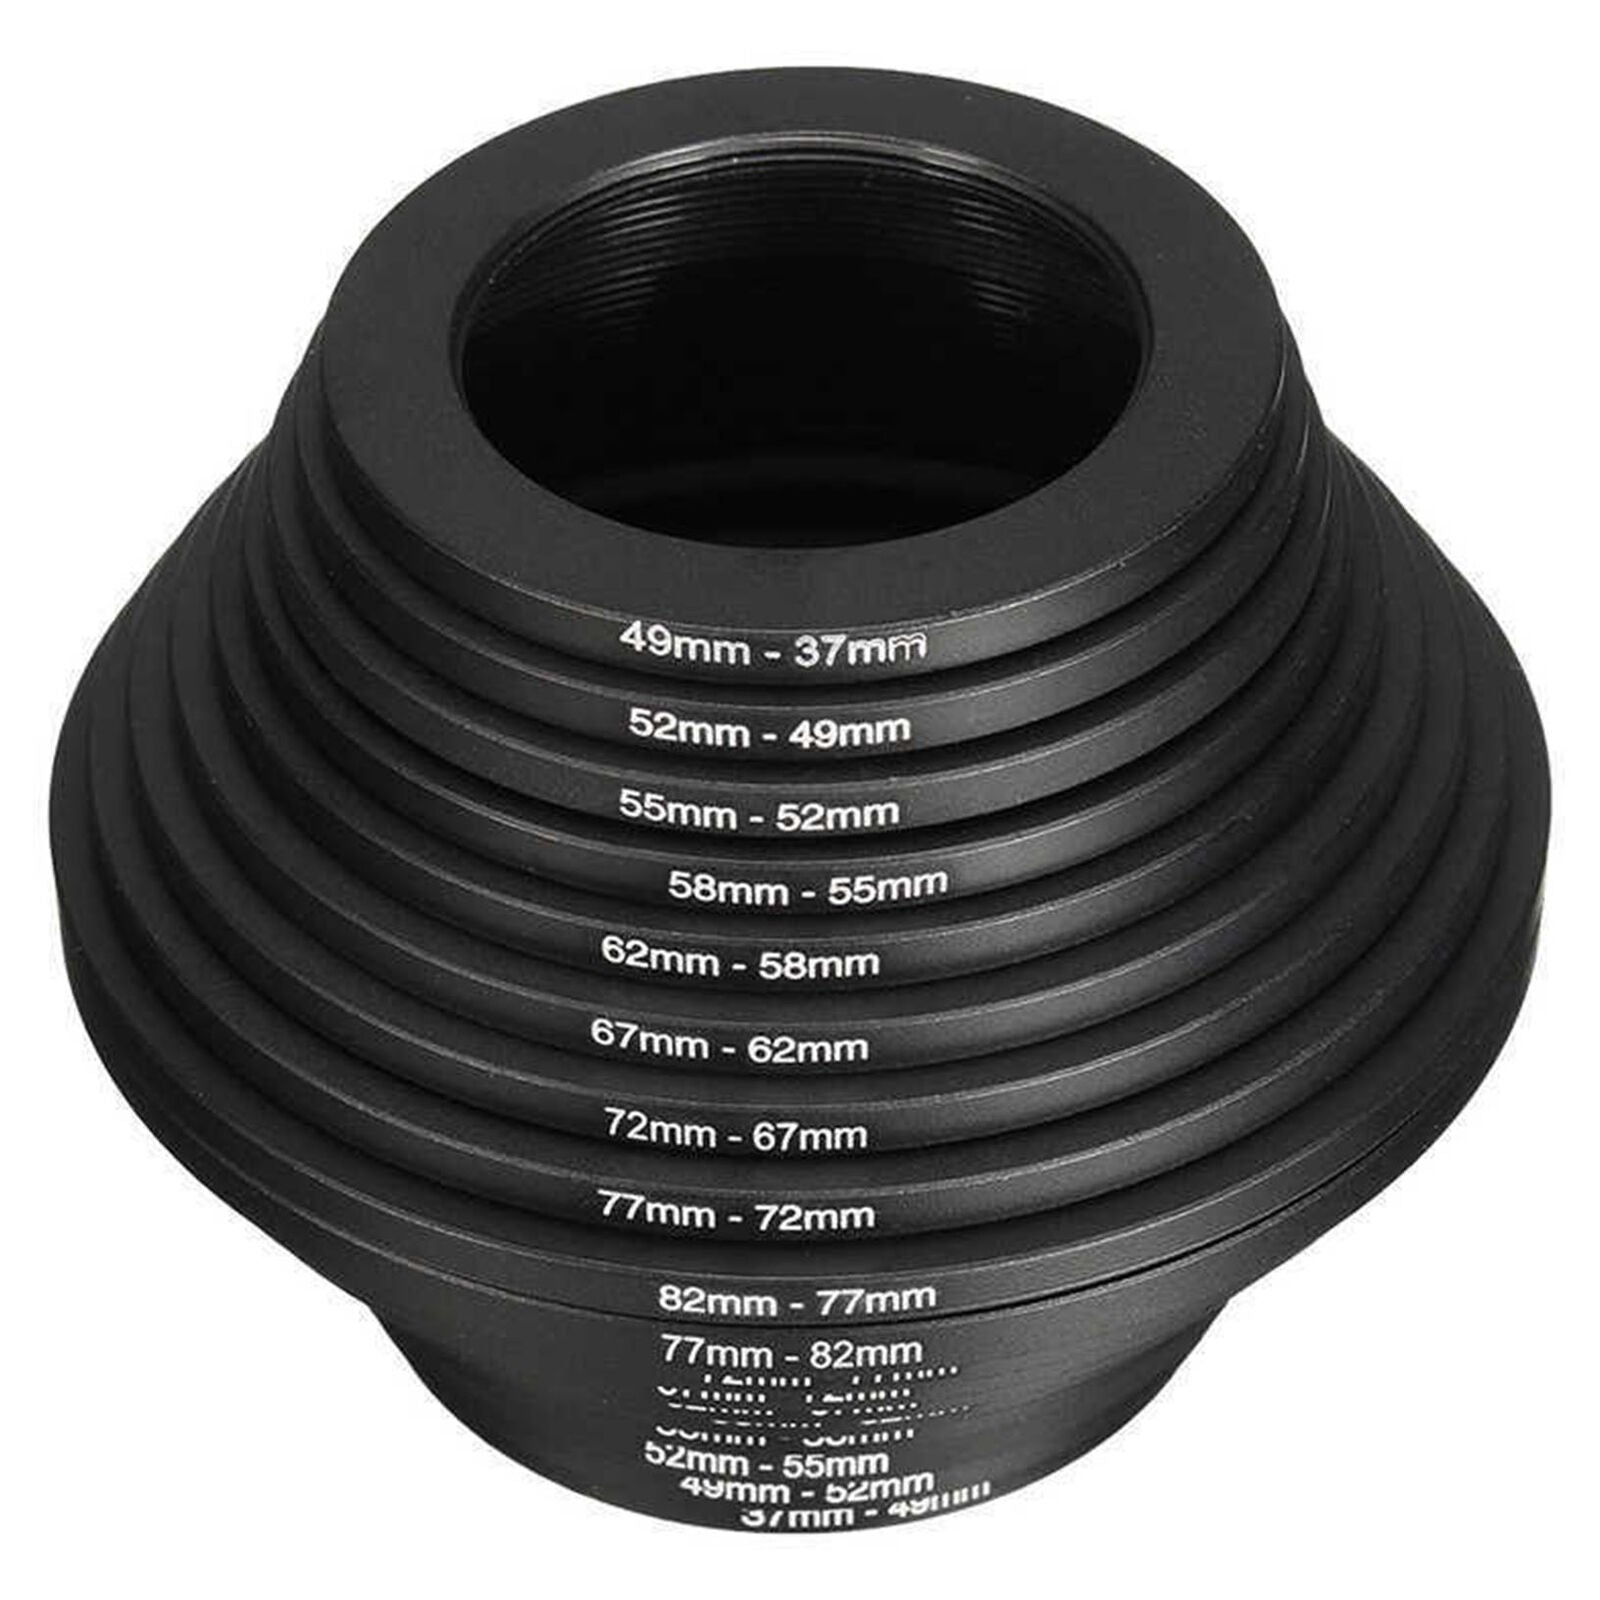 18pcs Step Up Down Lens Filter Ring Adapter Set 37 - 82mm For Canon Nikon Metal.